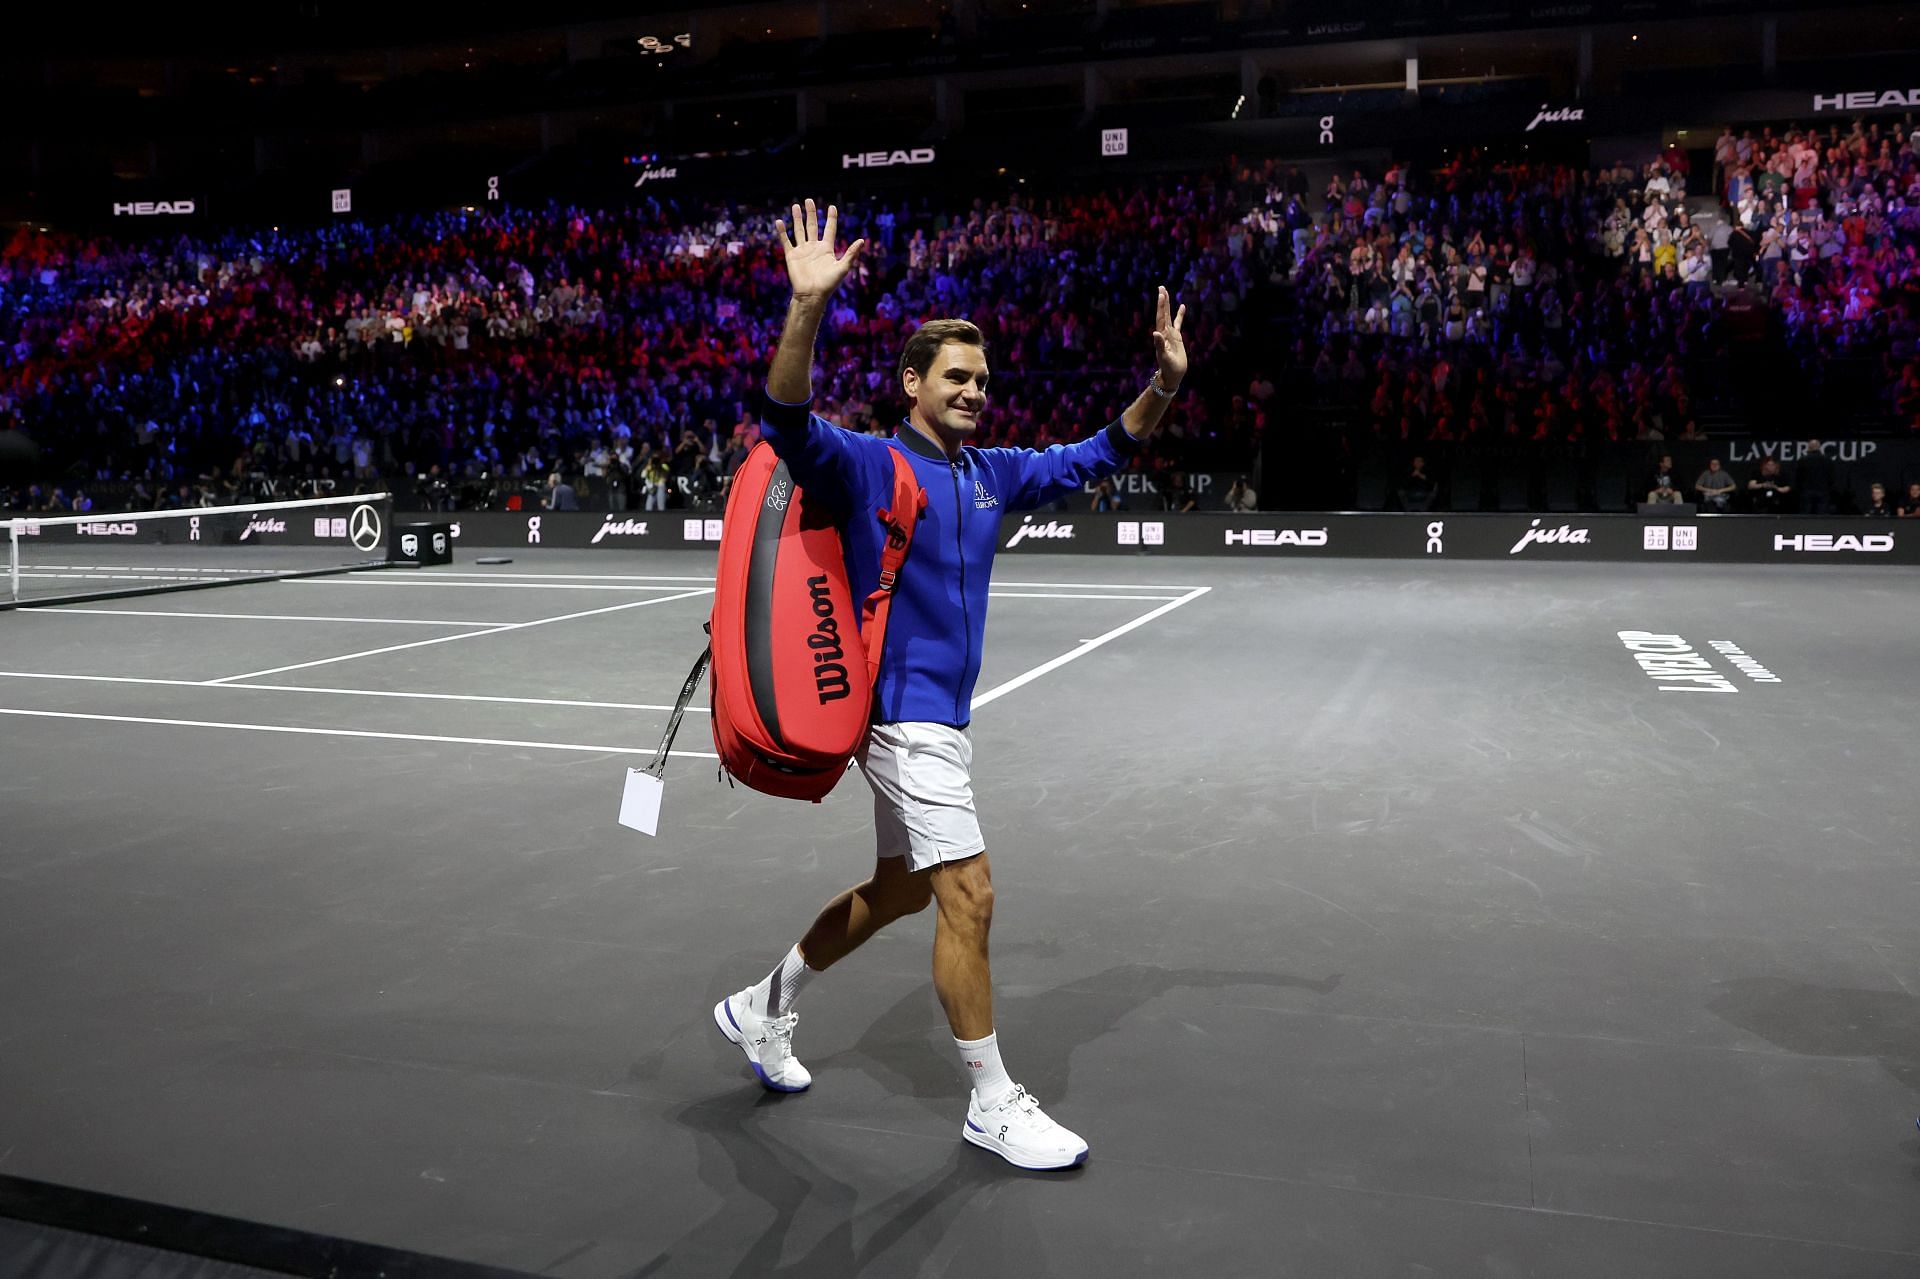 Roger Federer pictured at the 2022 Laver Cup in London